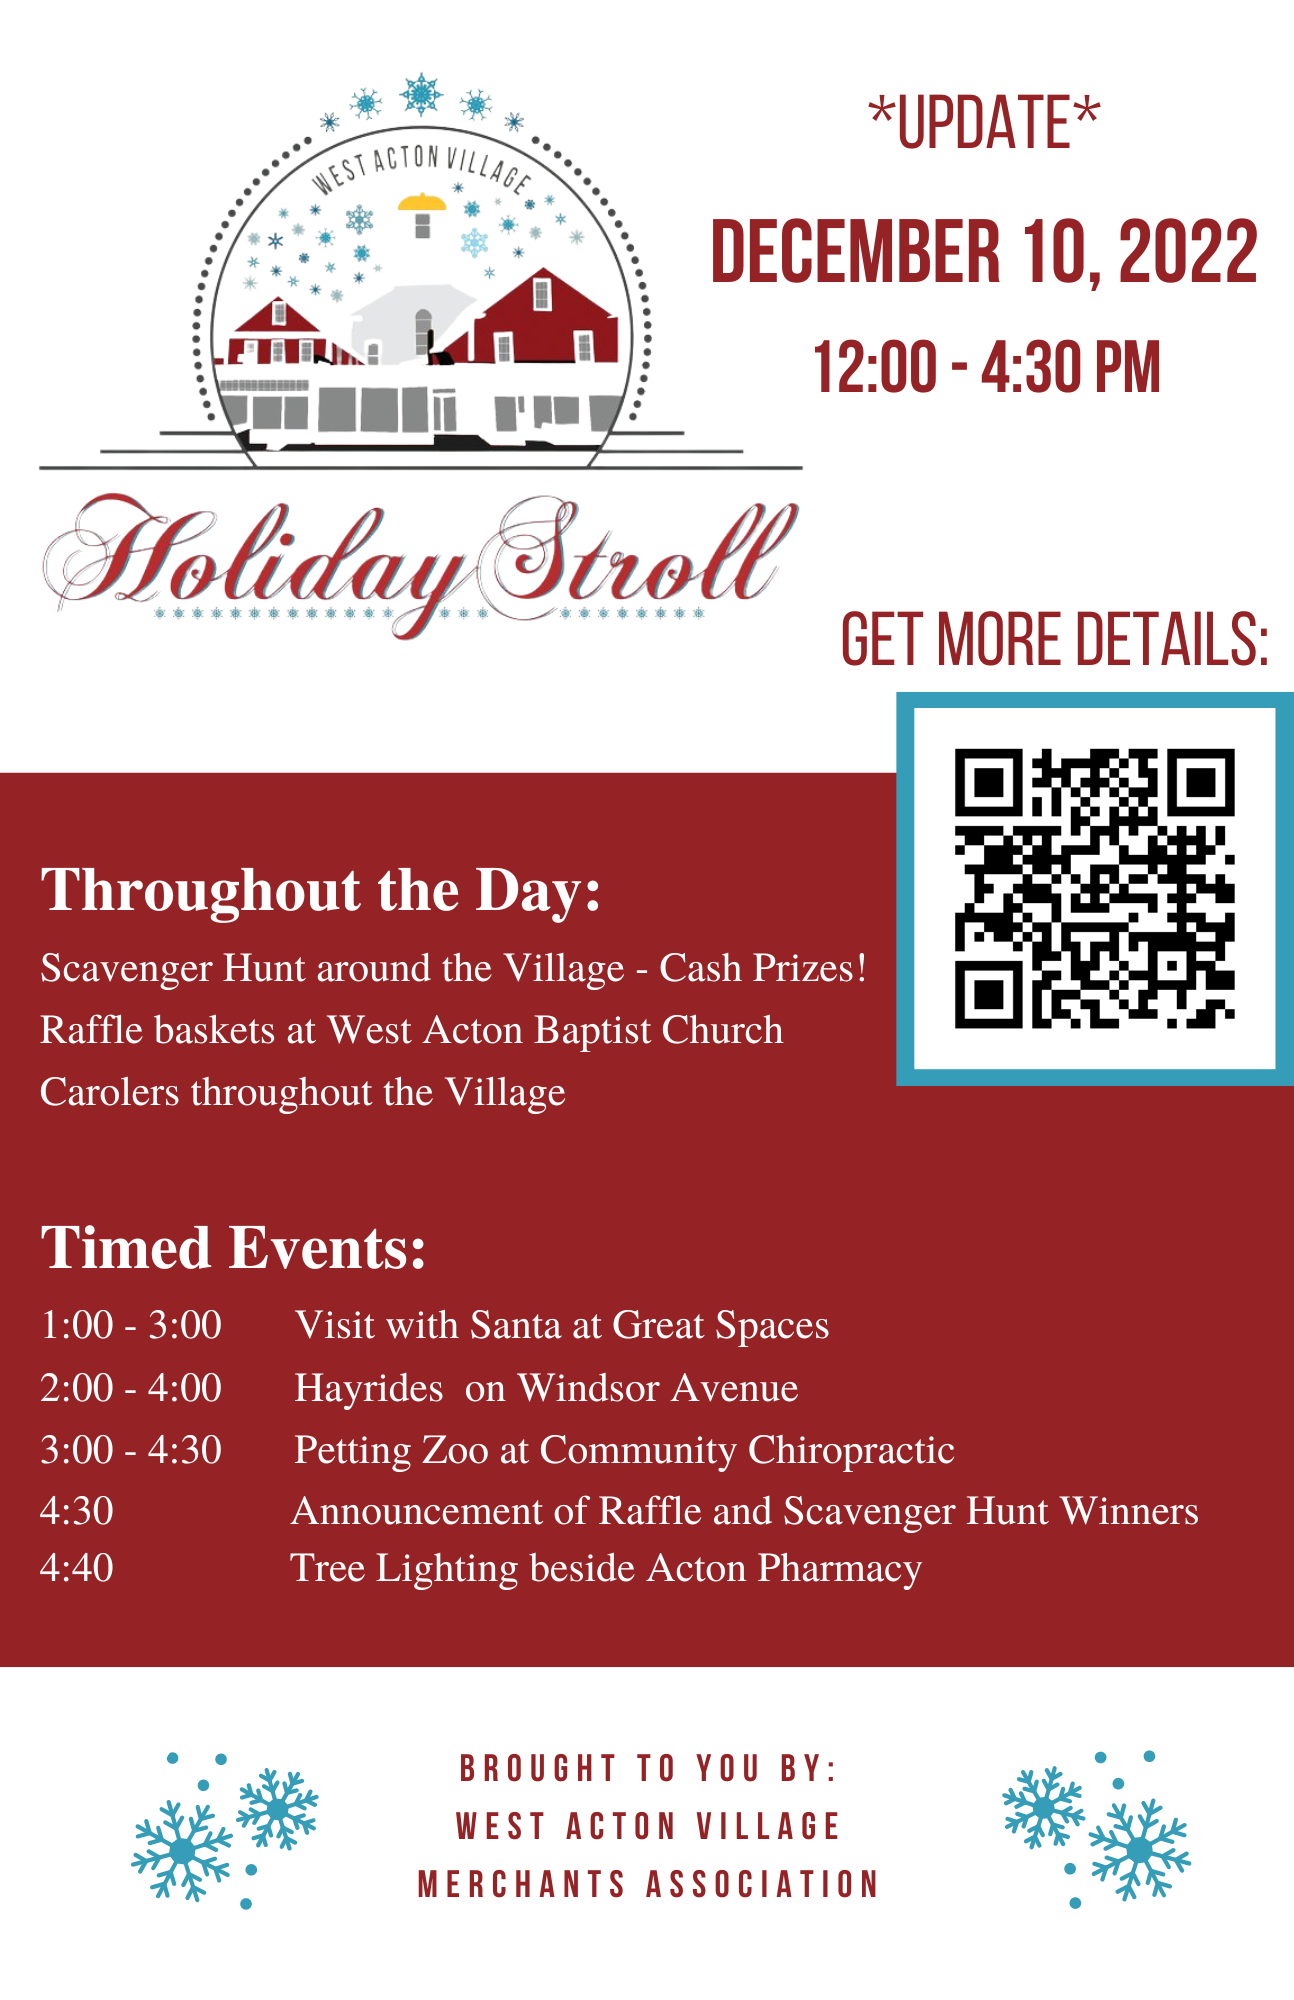 The 2022 West Acton Village Holiday Stroll will be on December 10th, 2022 from 12 PM to 4:30 PM